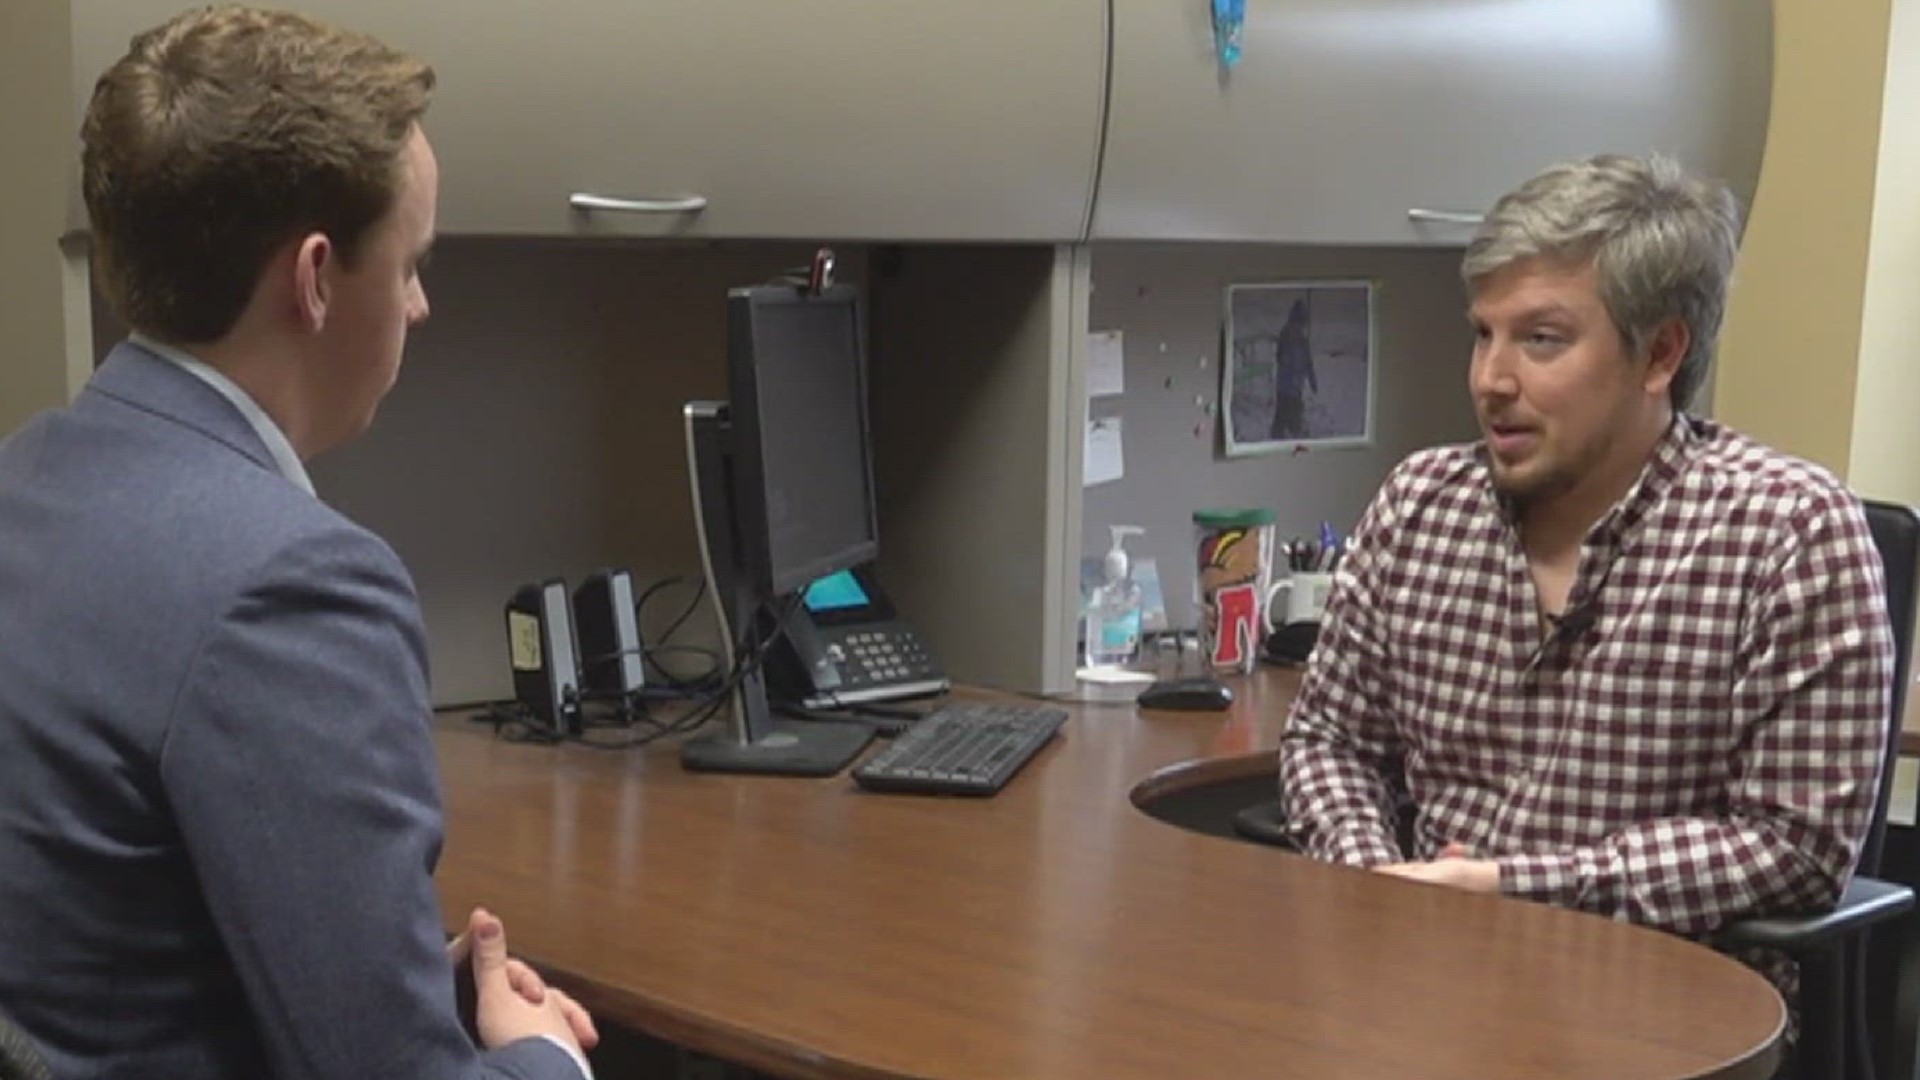 News 8 sat down with Augustana College's Dr. Paul Baumgardner to discuss what's at stake for the candidates trying to earn your vote.